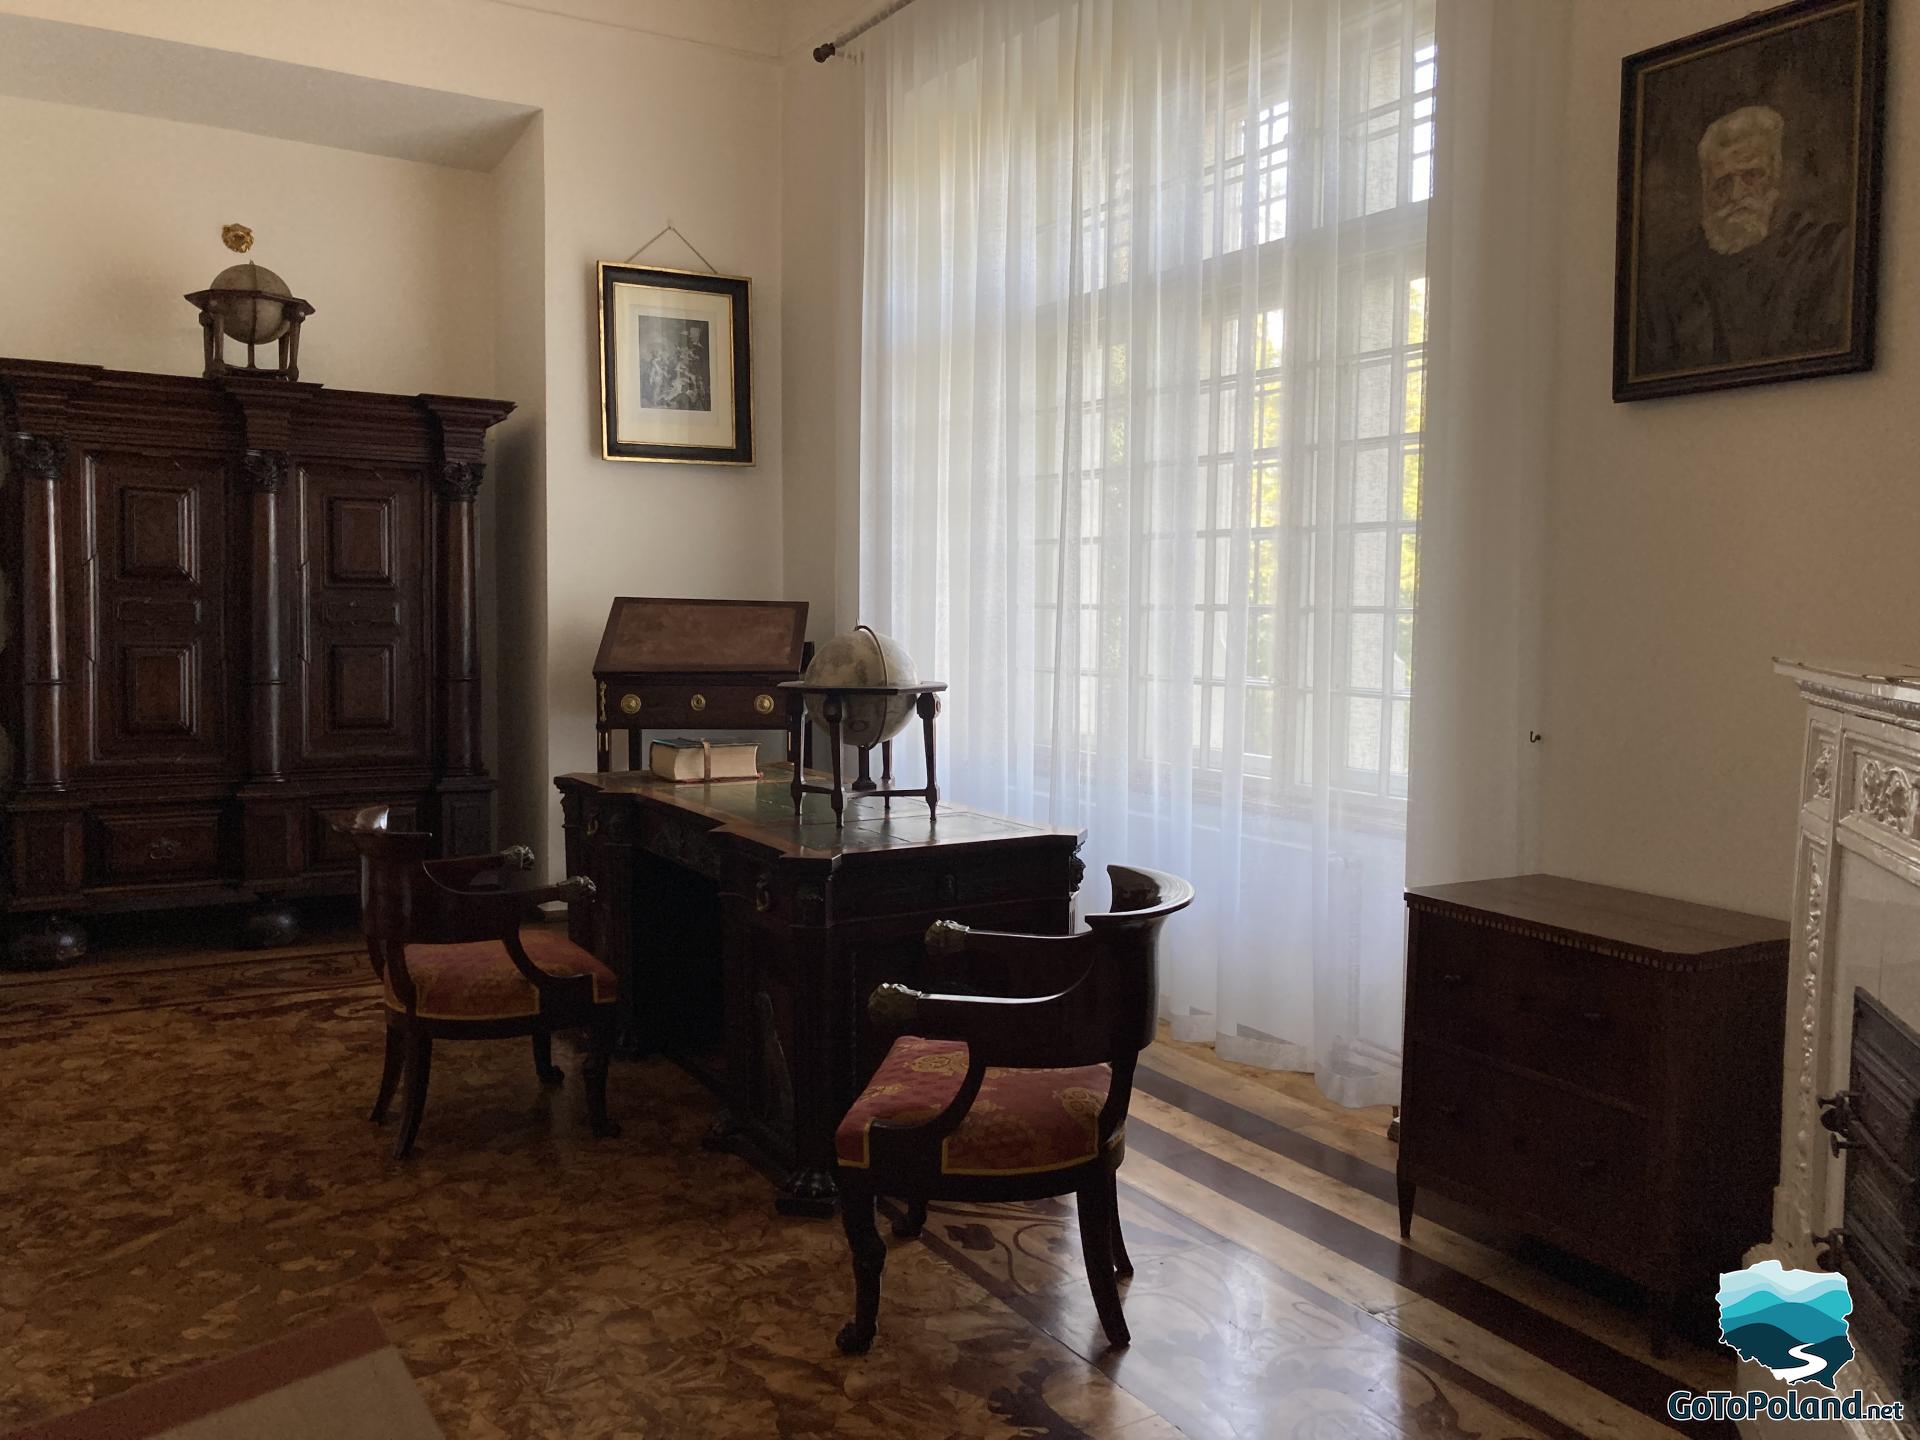 Room with wooden furniture, large oak desk, two chairs, and a wardrobe